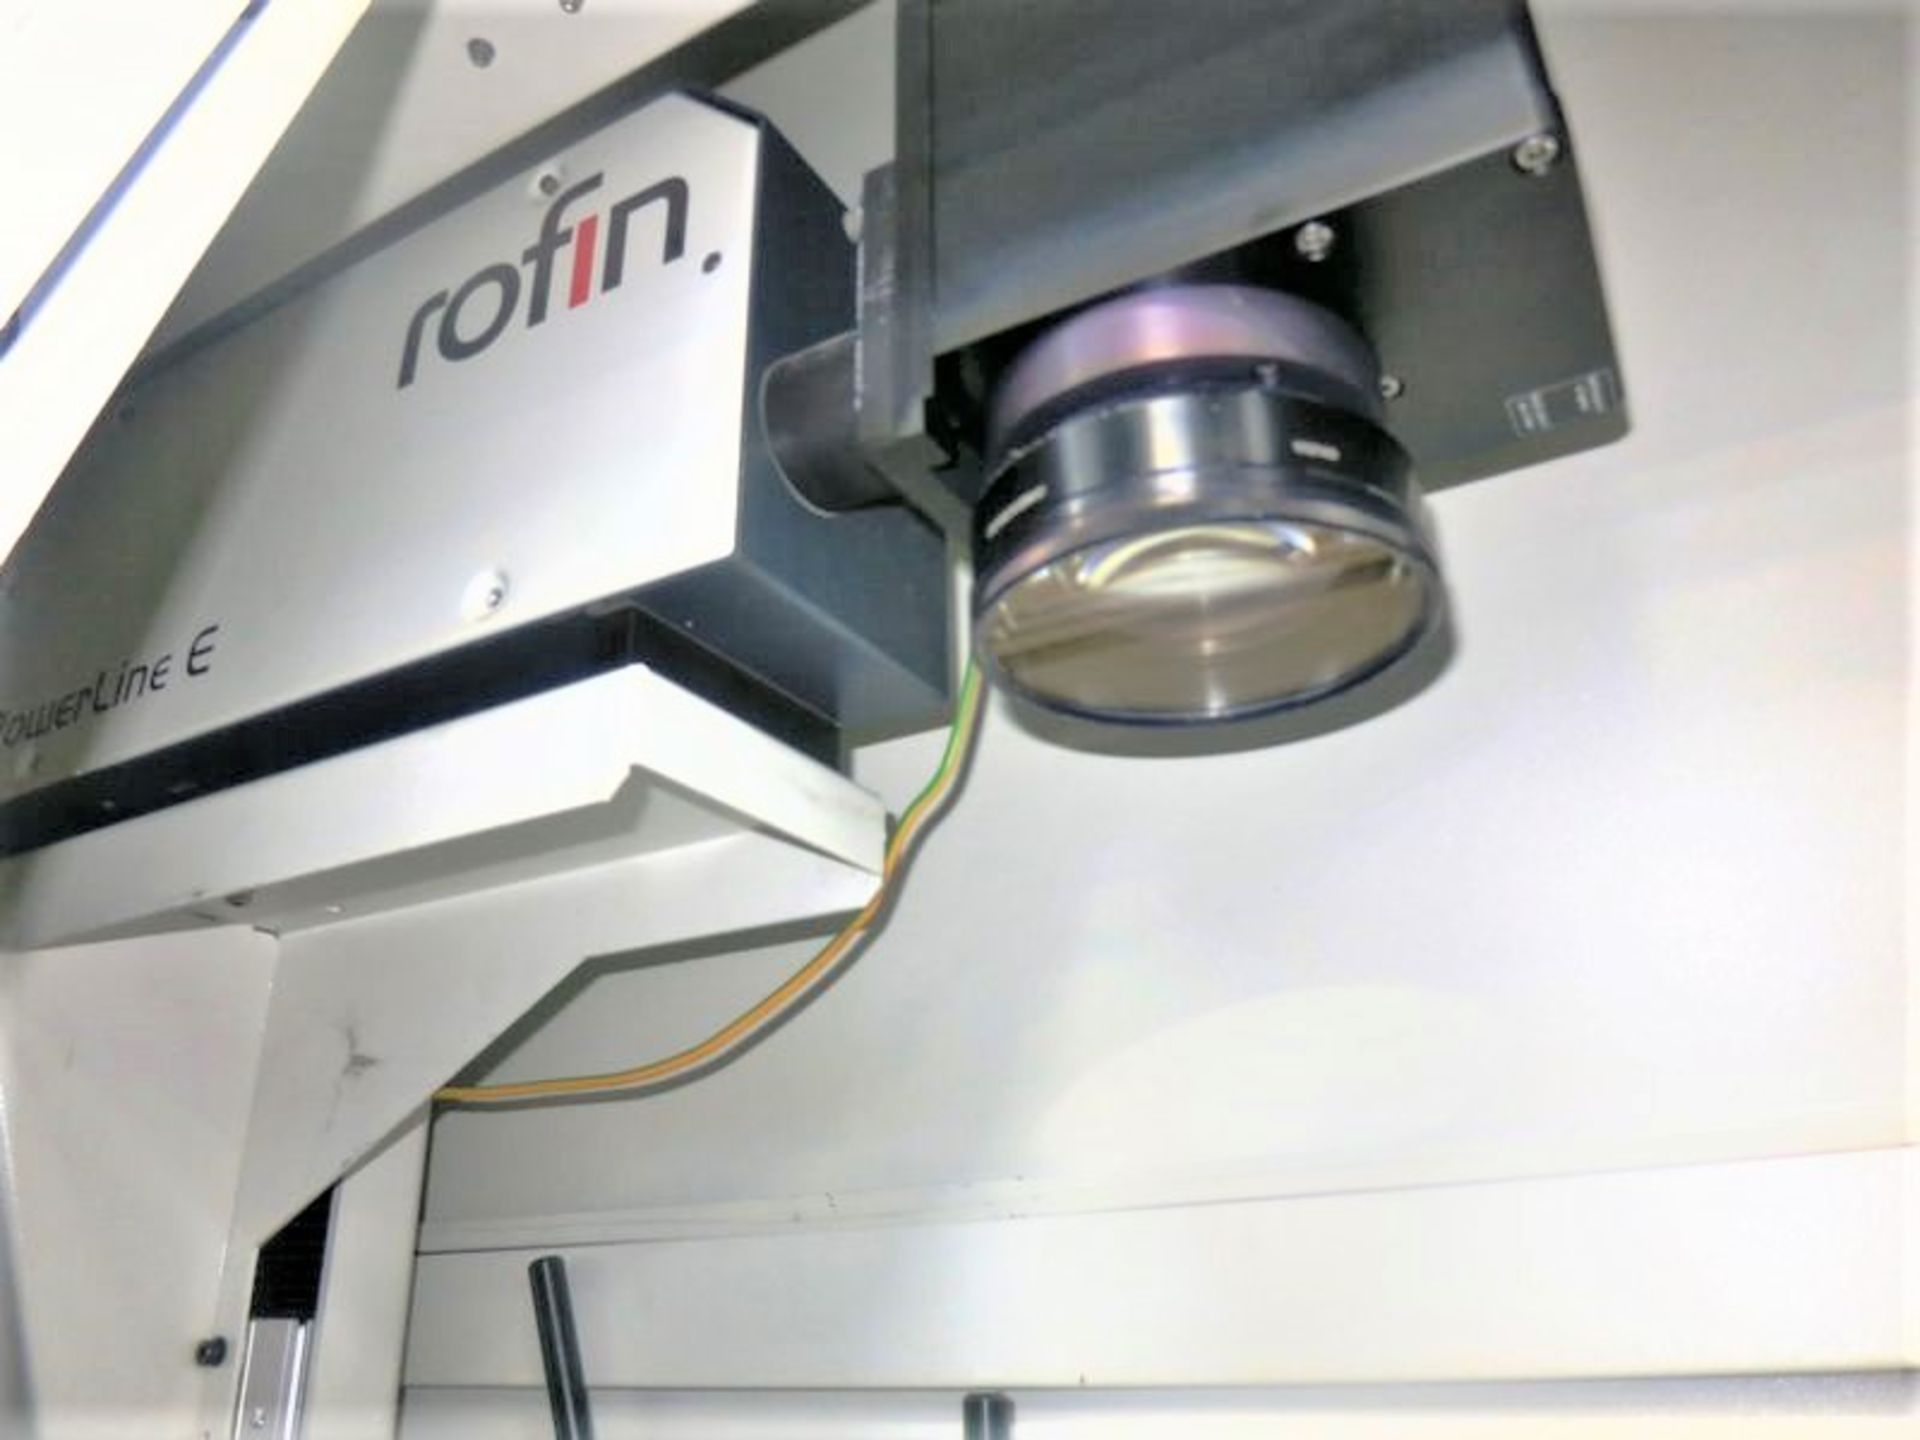 Rofin Starmark SLM 10E Fully Programmable CNC Laser Marking System W/Rotary Table - Image 4 of 13